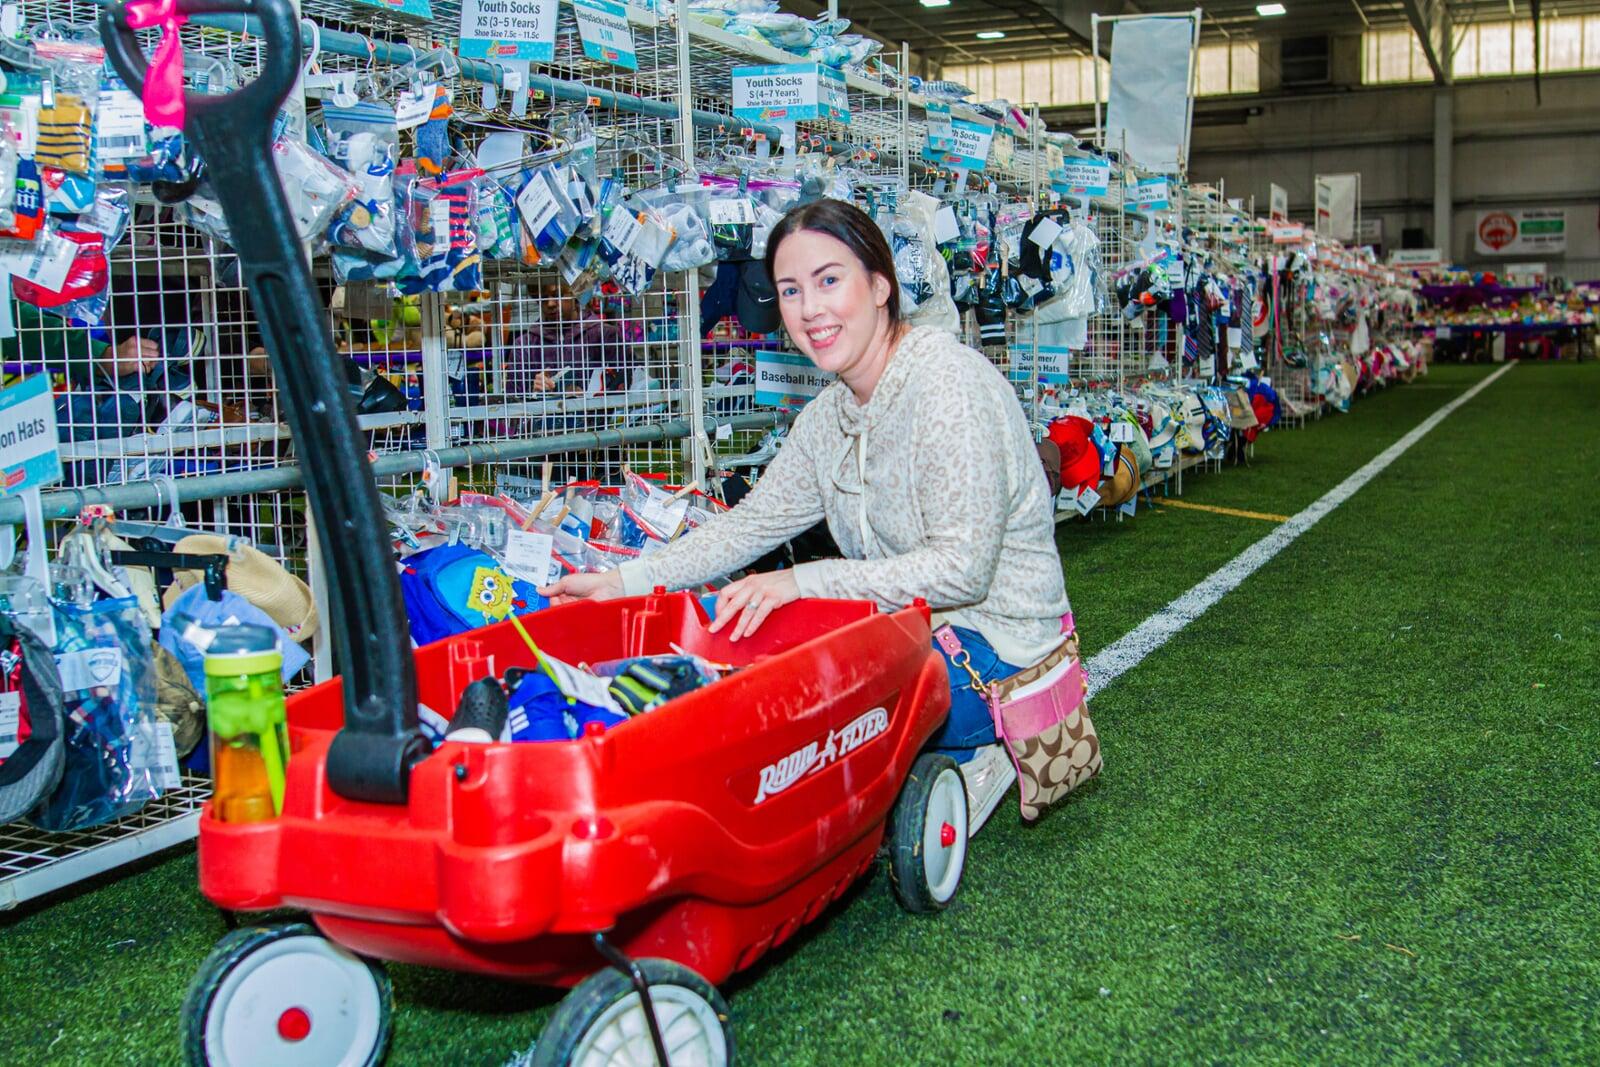 Woman sitting on the astro turf putting items in her red wagon.